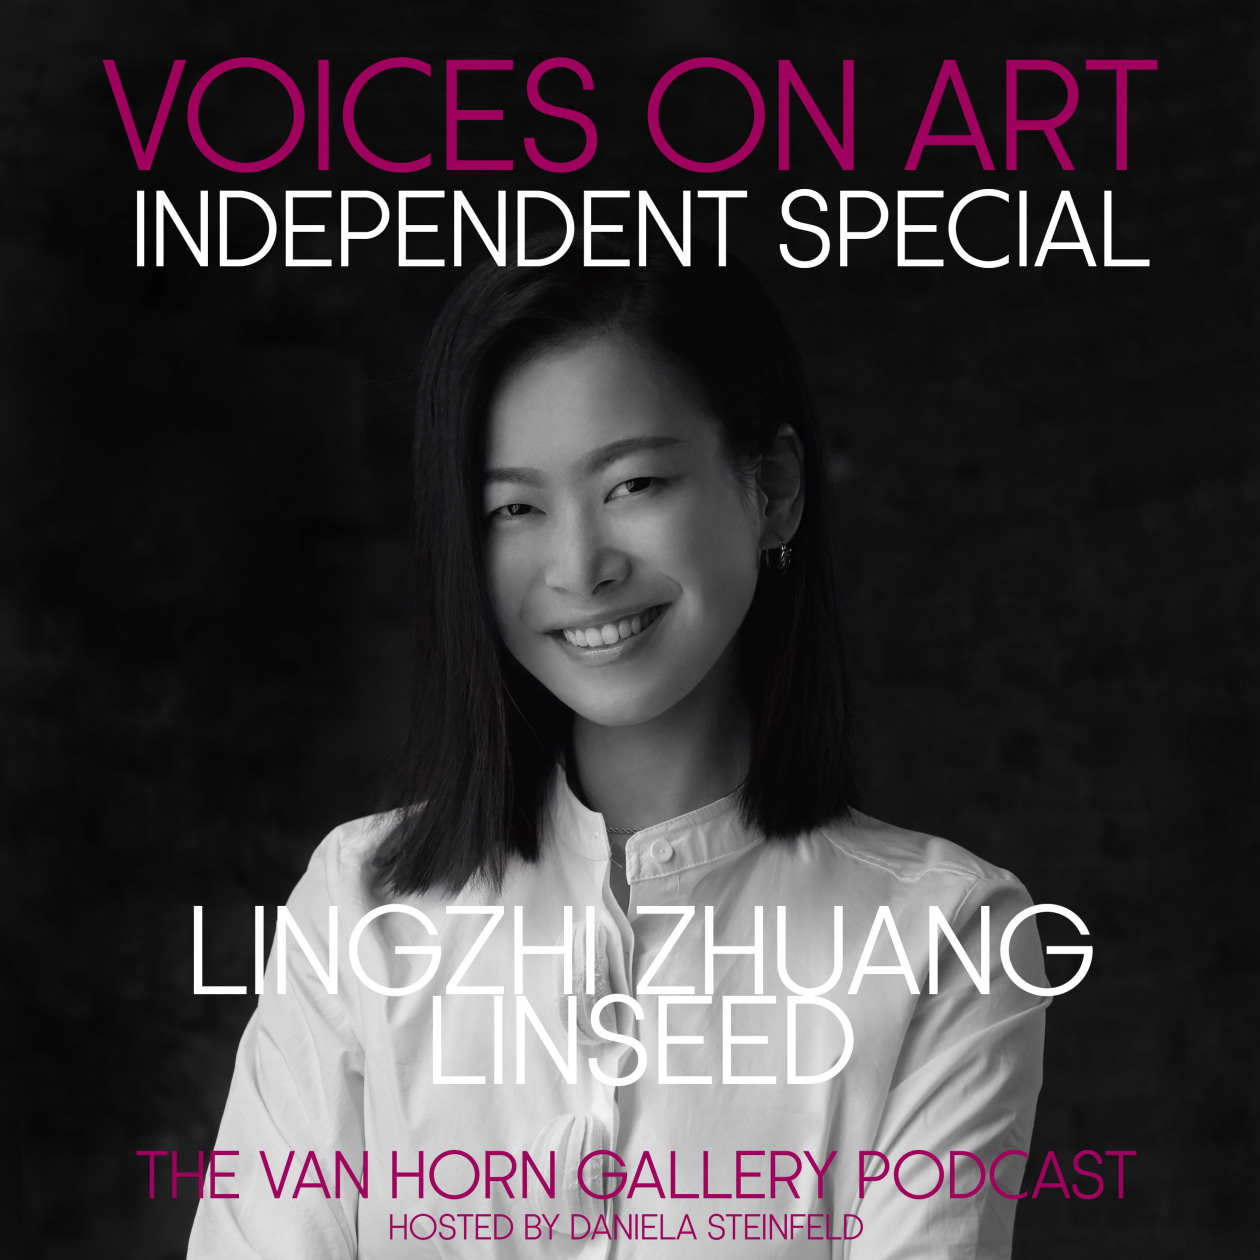 Independent Special: Voices on Art Podcast featuring Lingzhi Zhuang